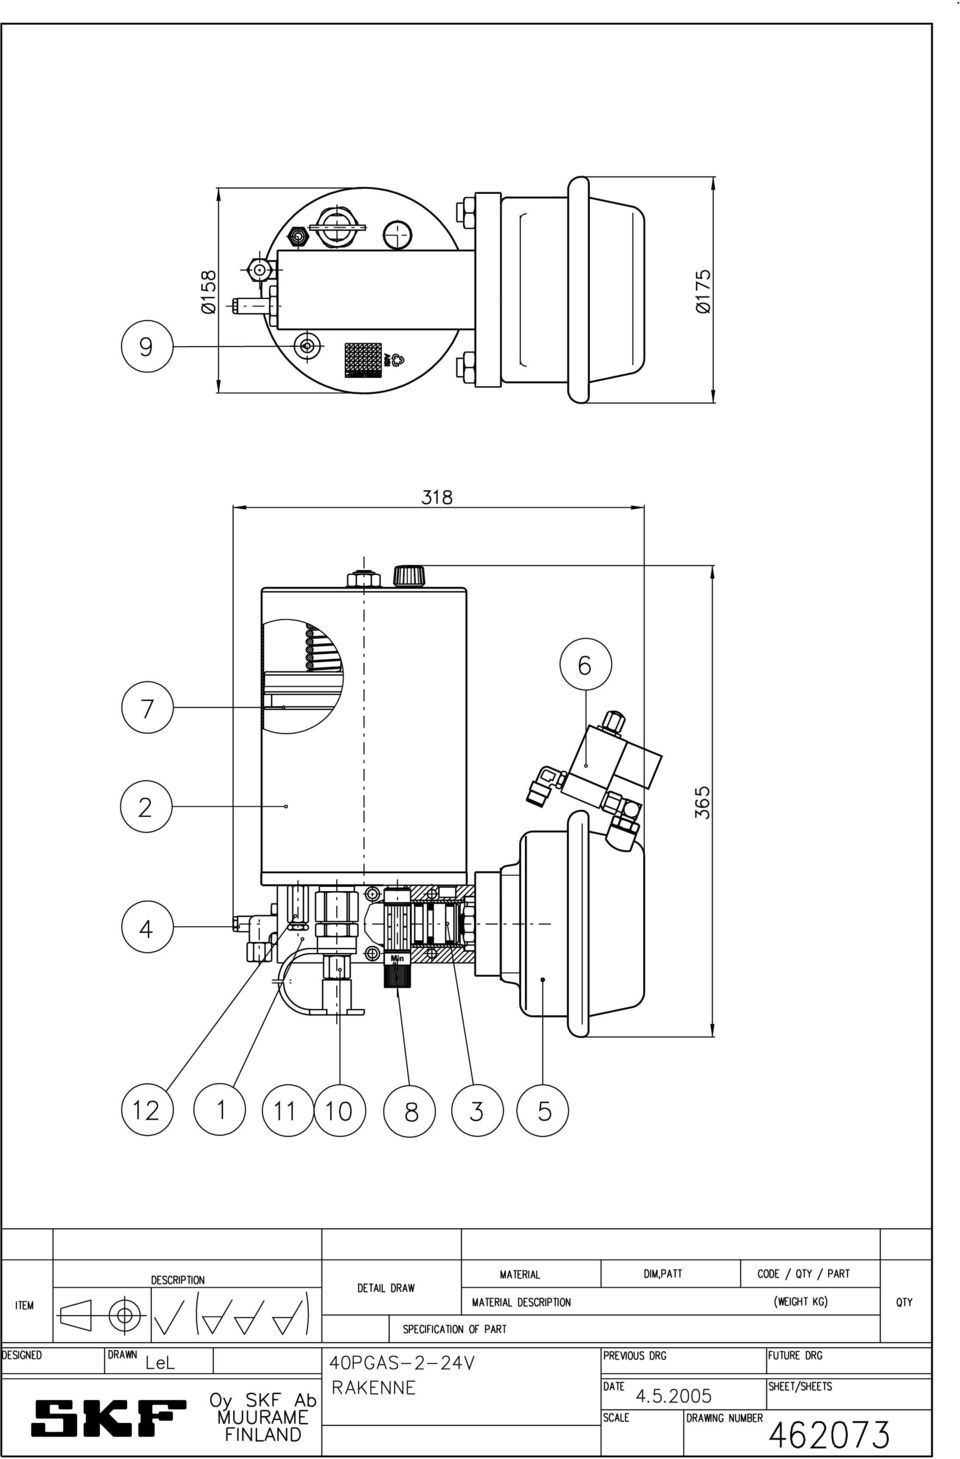 SPECIFICATION OF PART DESIGNED DRAWN LeL 40PGAS-2-24V PREVIOUS DRG FUTURE DRG